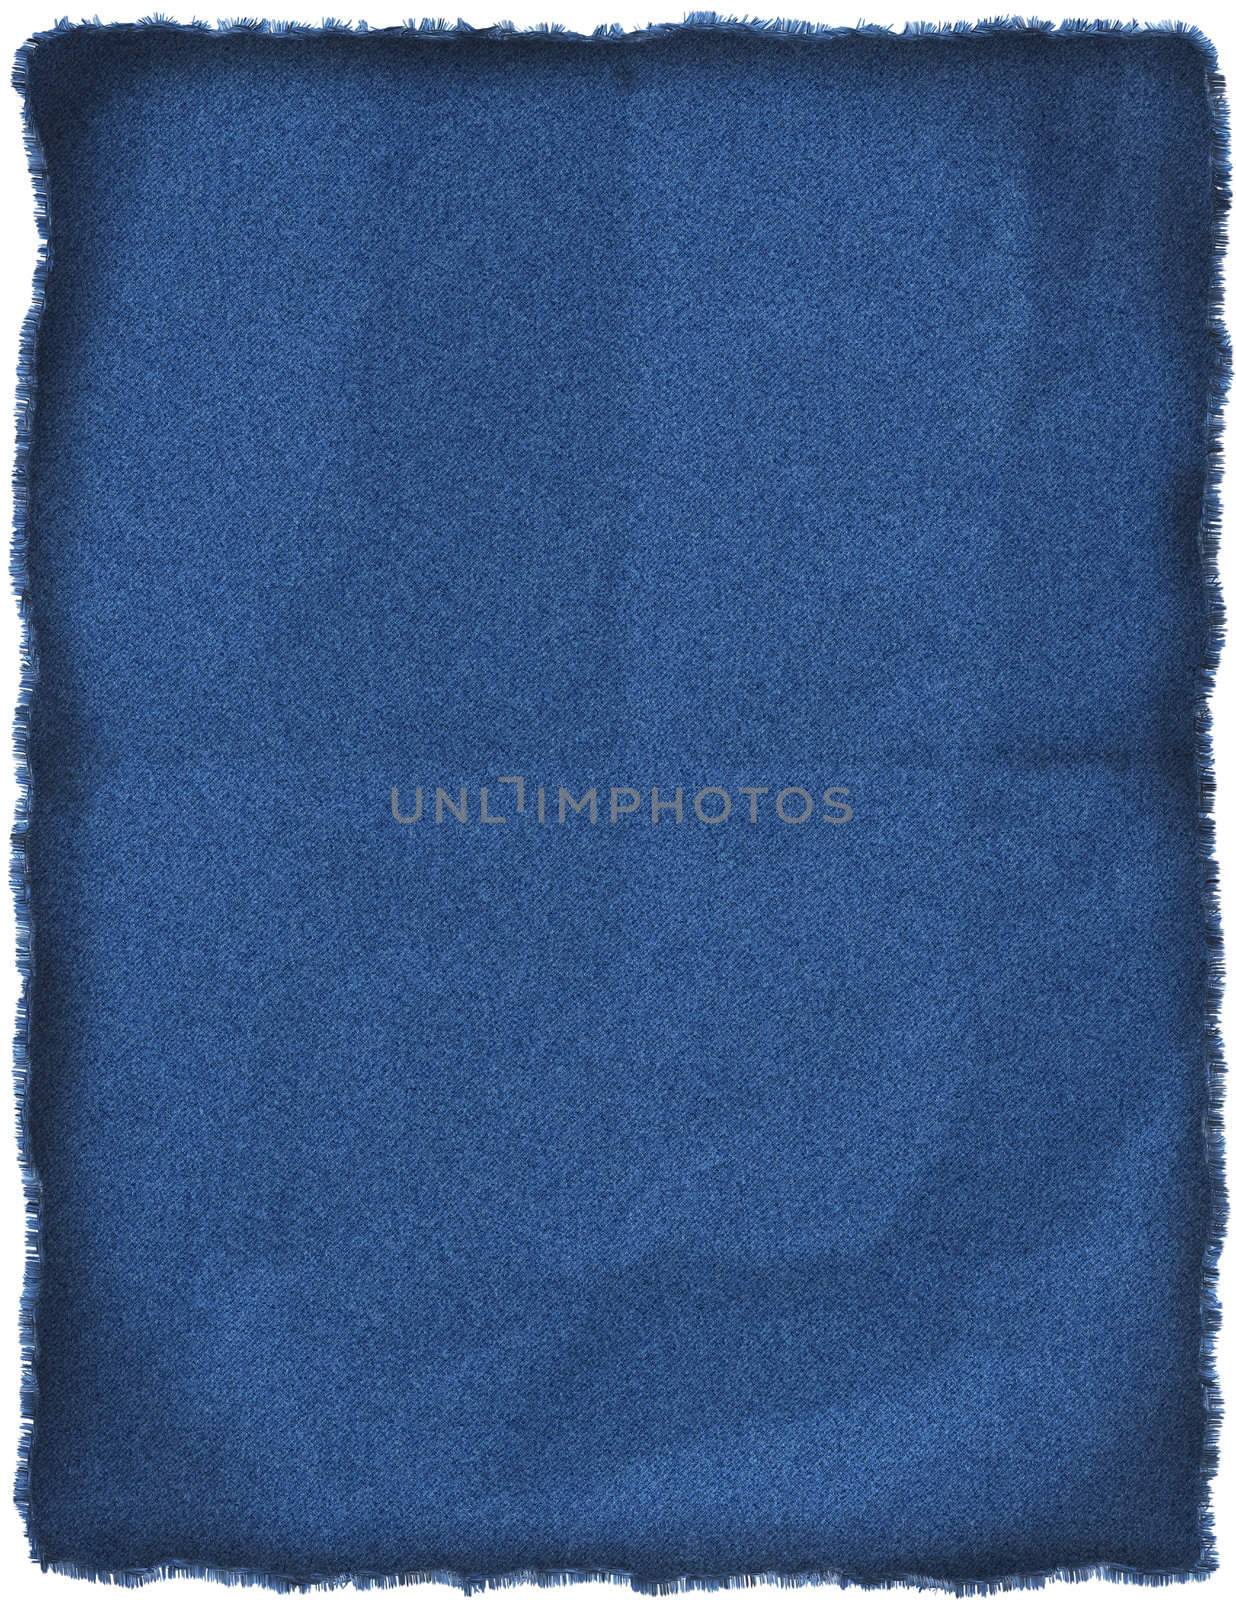 Wrinkled, old blue jeans patch on letter size paper.